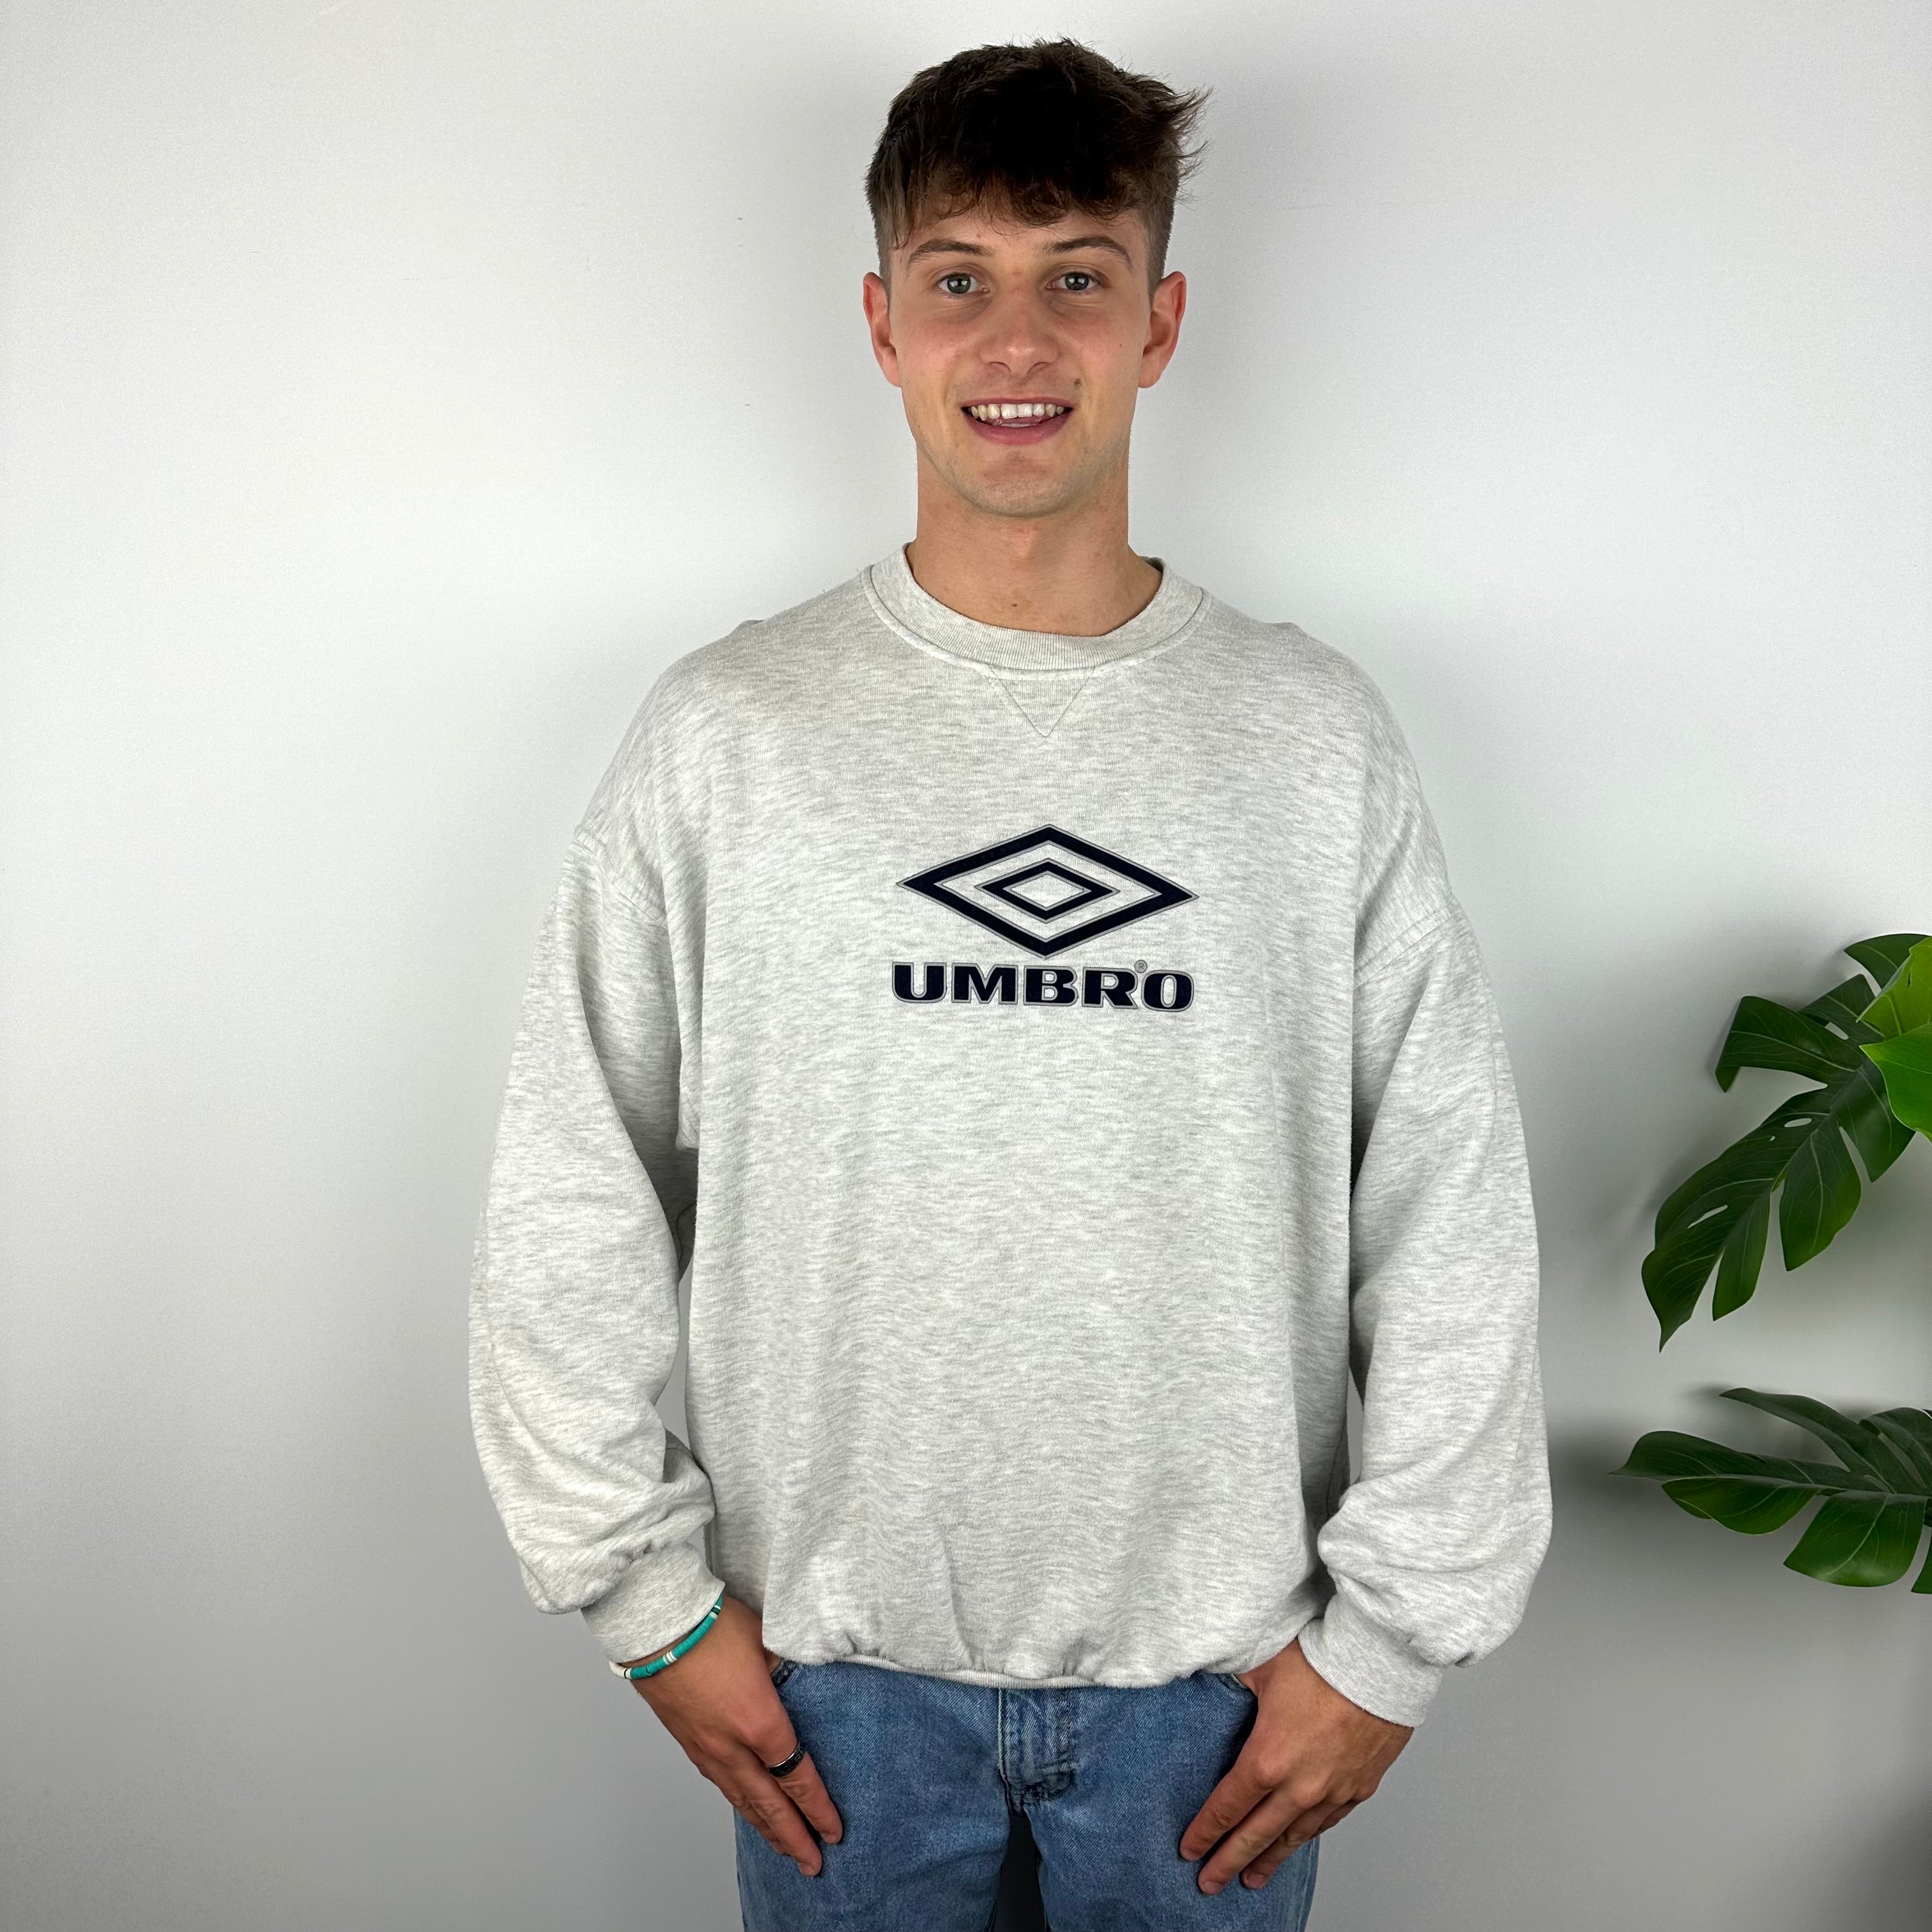 Umbro Grey Embroidered Spell Out Sweatshirt (XL)